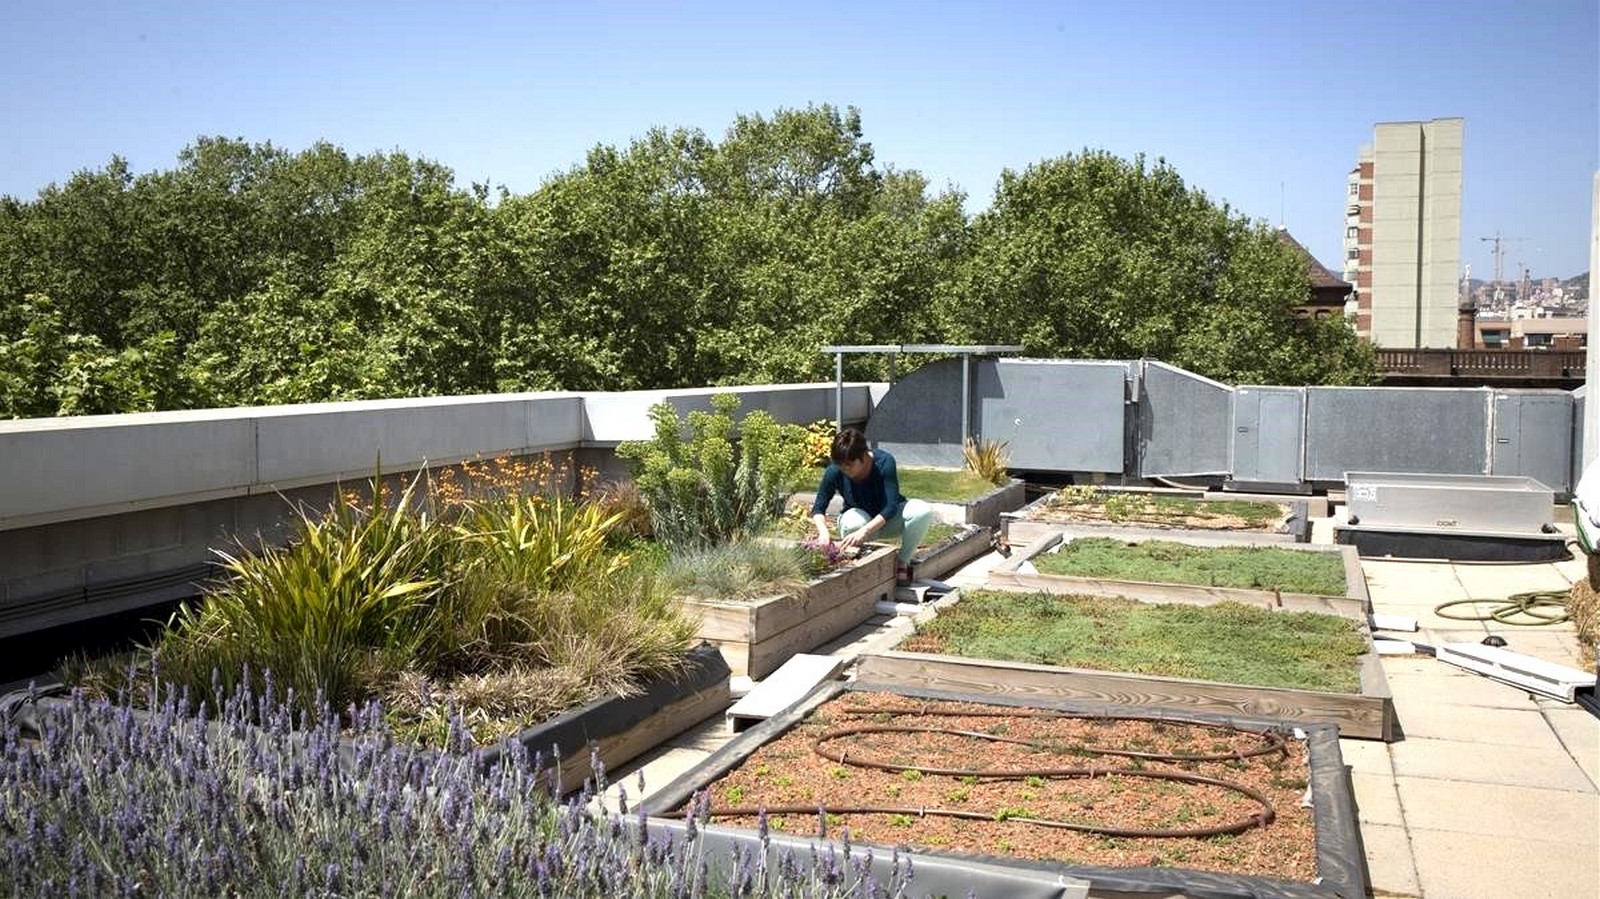 Is Rooftop Architecture a Sustainable Alternative? Sheet2